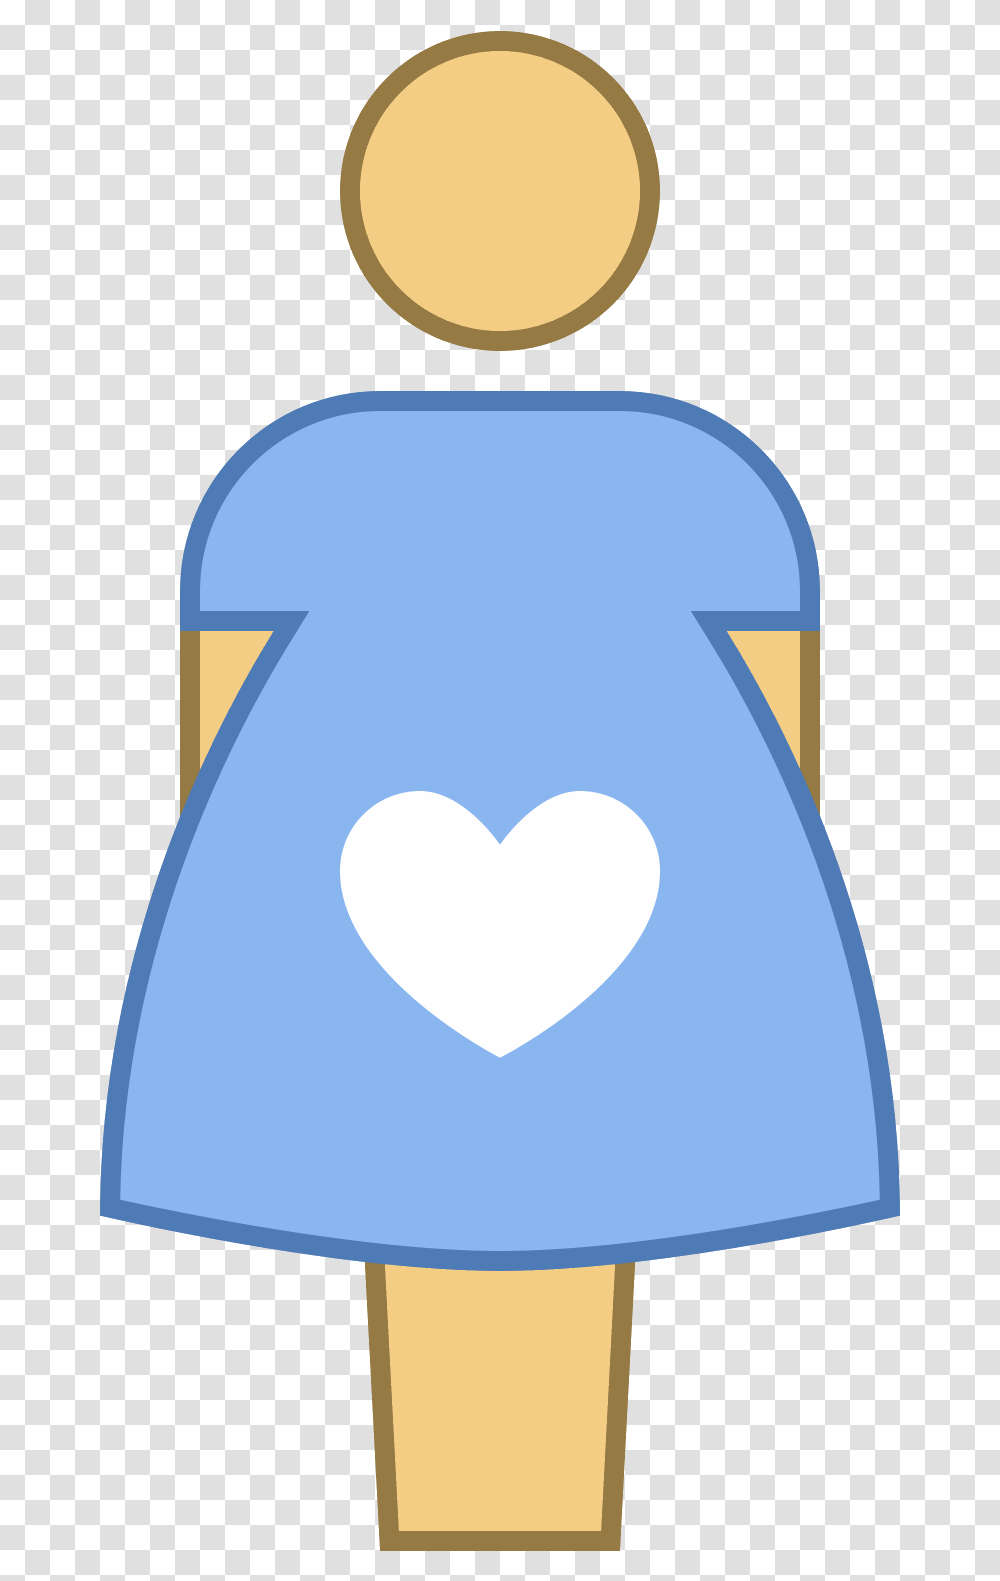 Pregnant Vector Clipart Royalty Free Fruit Of The Spirit Crafts Love Preschoolers, Apparel, Heart Transparent Png